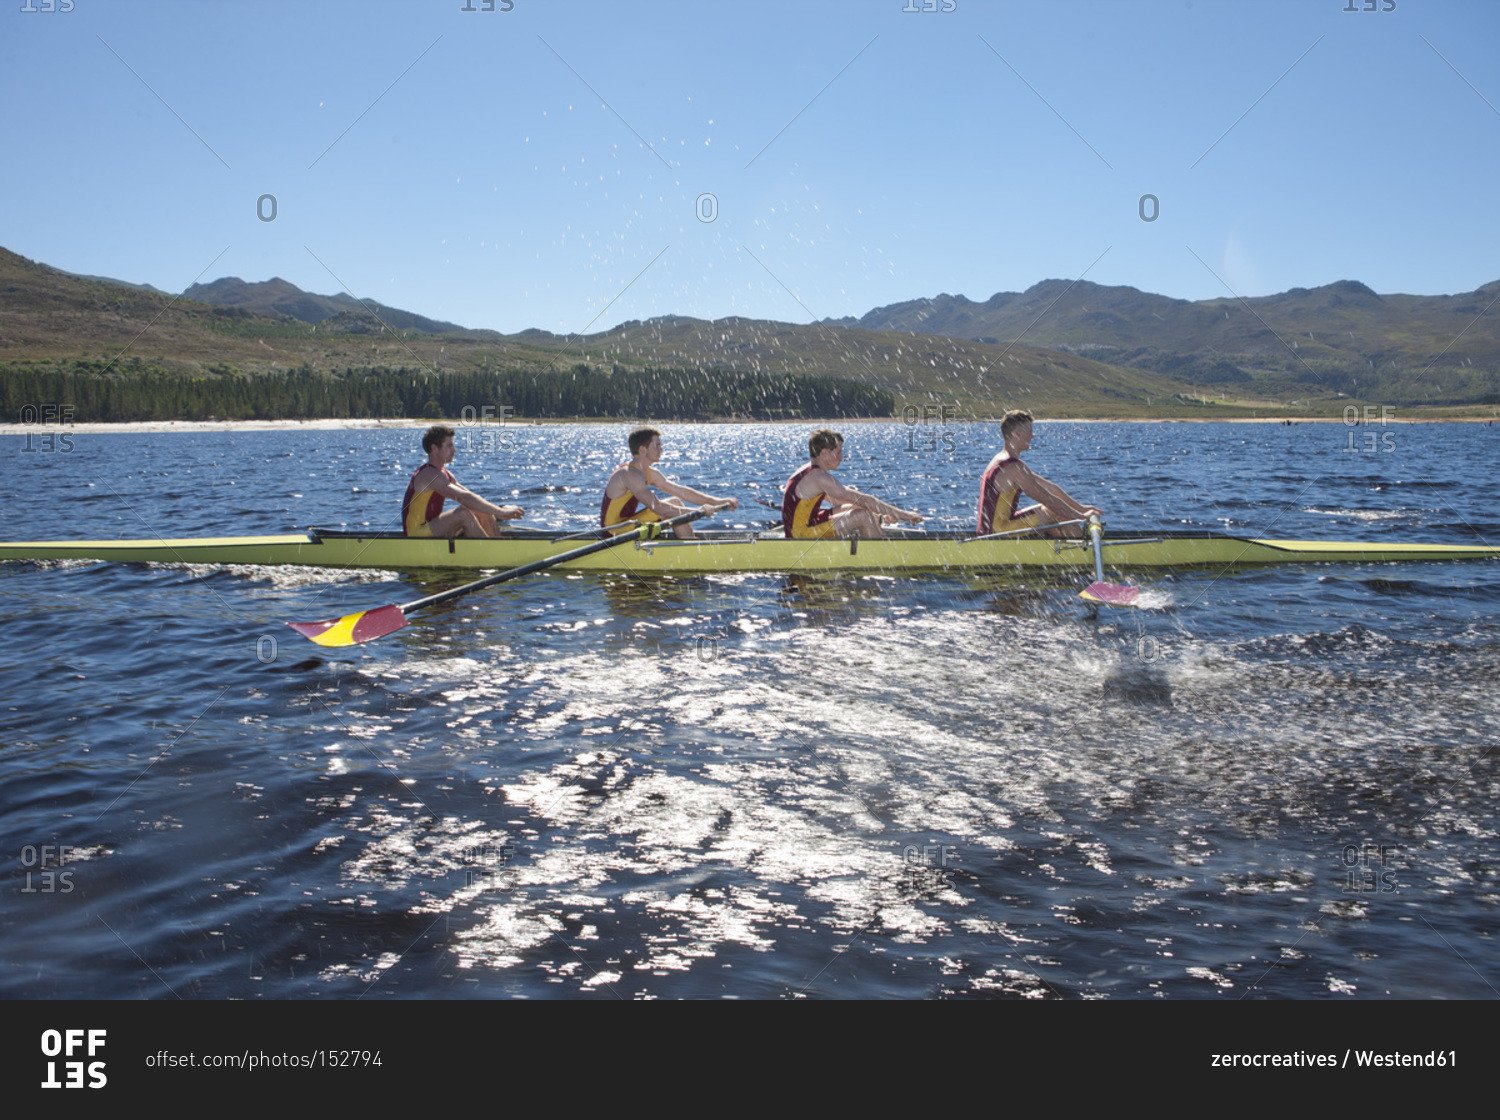 Profile of a coxless four rowing boat in water